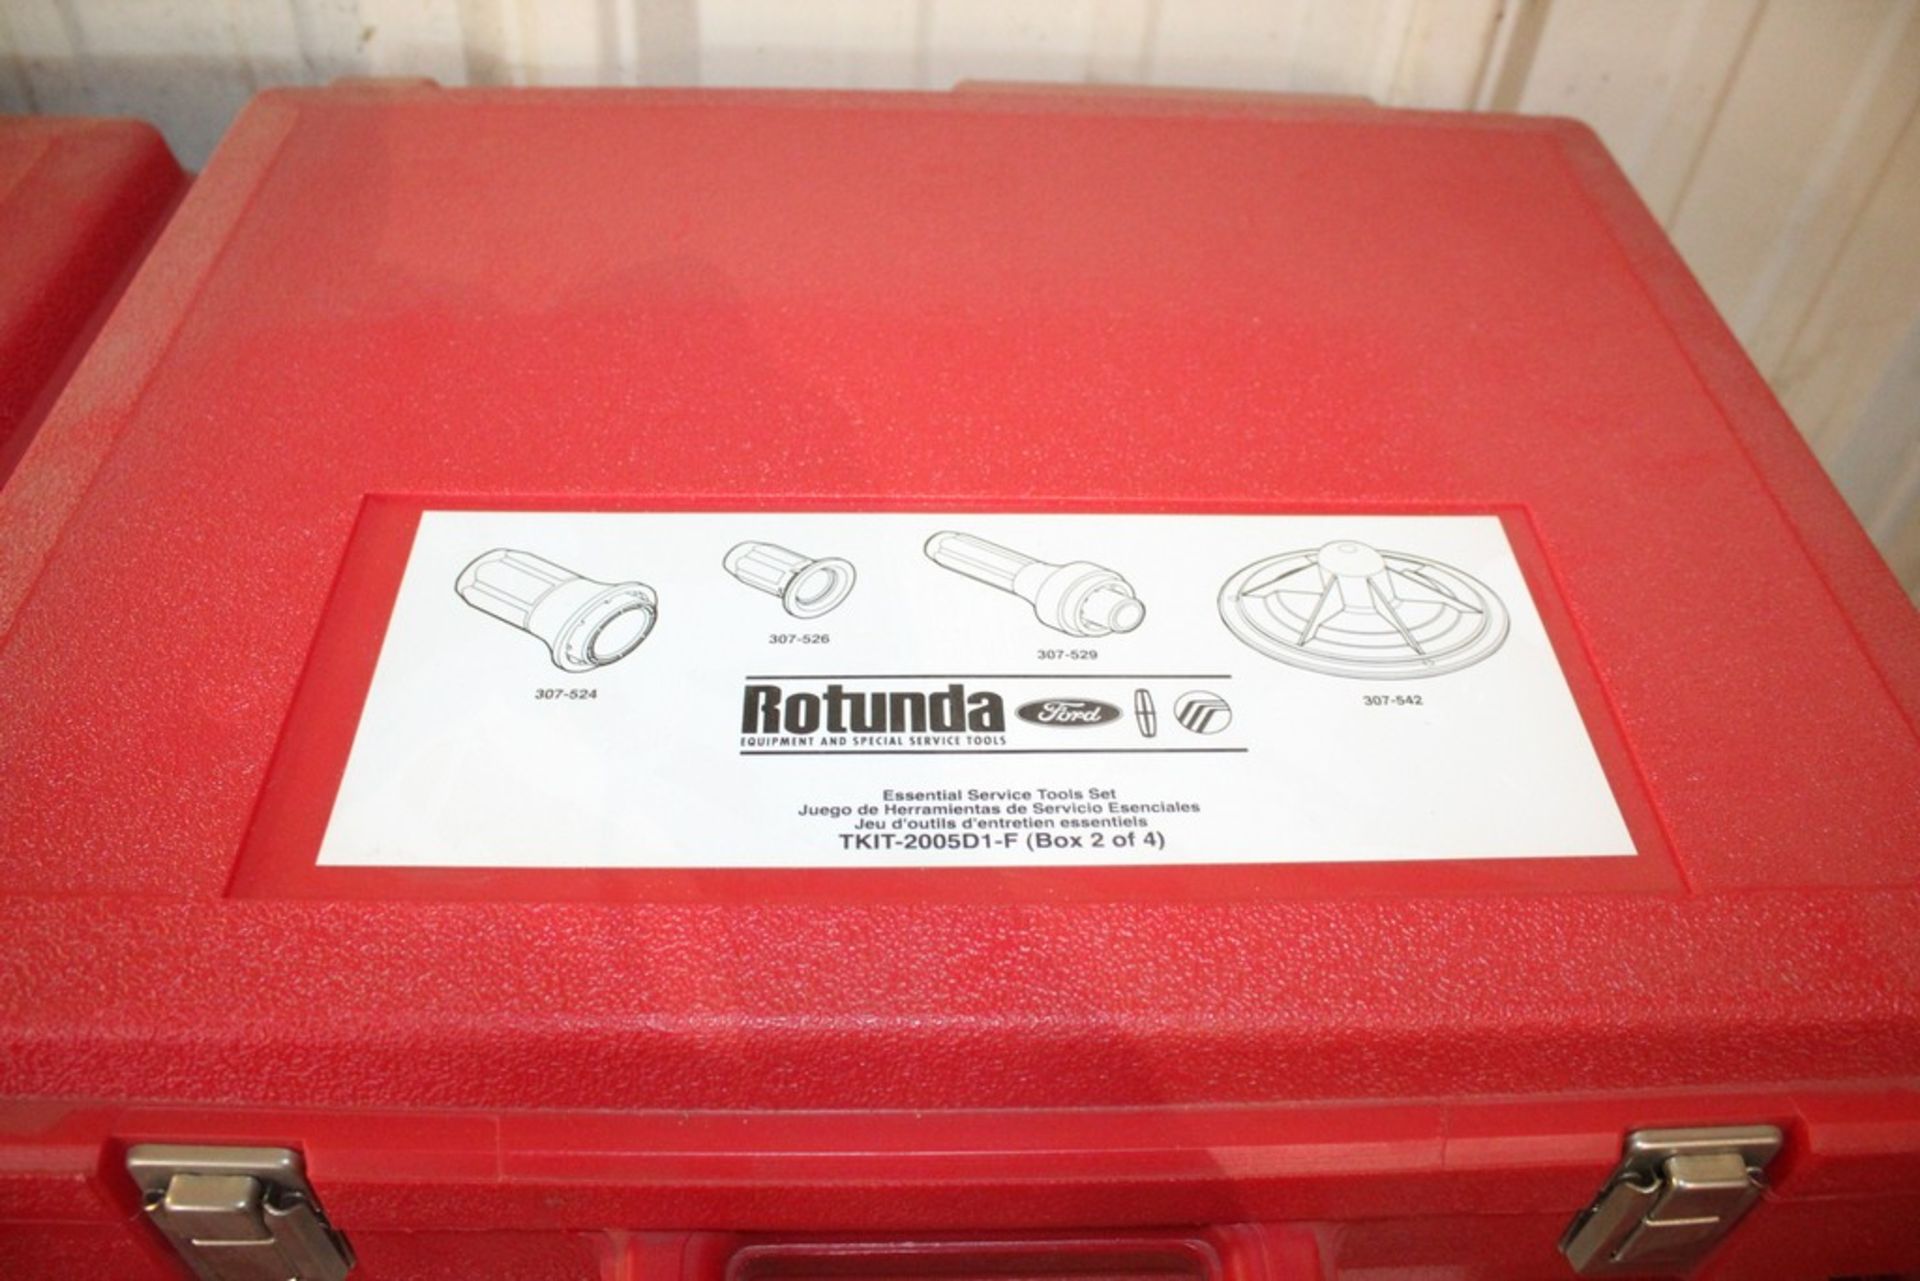 FORD ROTUNDA ESSENTIAL SERVICE TOOL SET-TKIT-2005D1-F IN FOUR CASES - Image 2 of 6